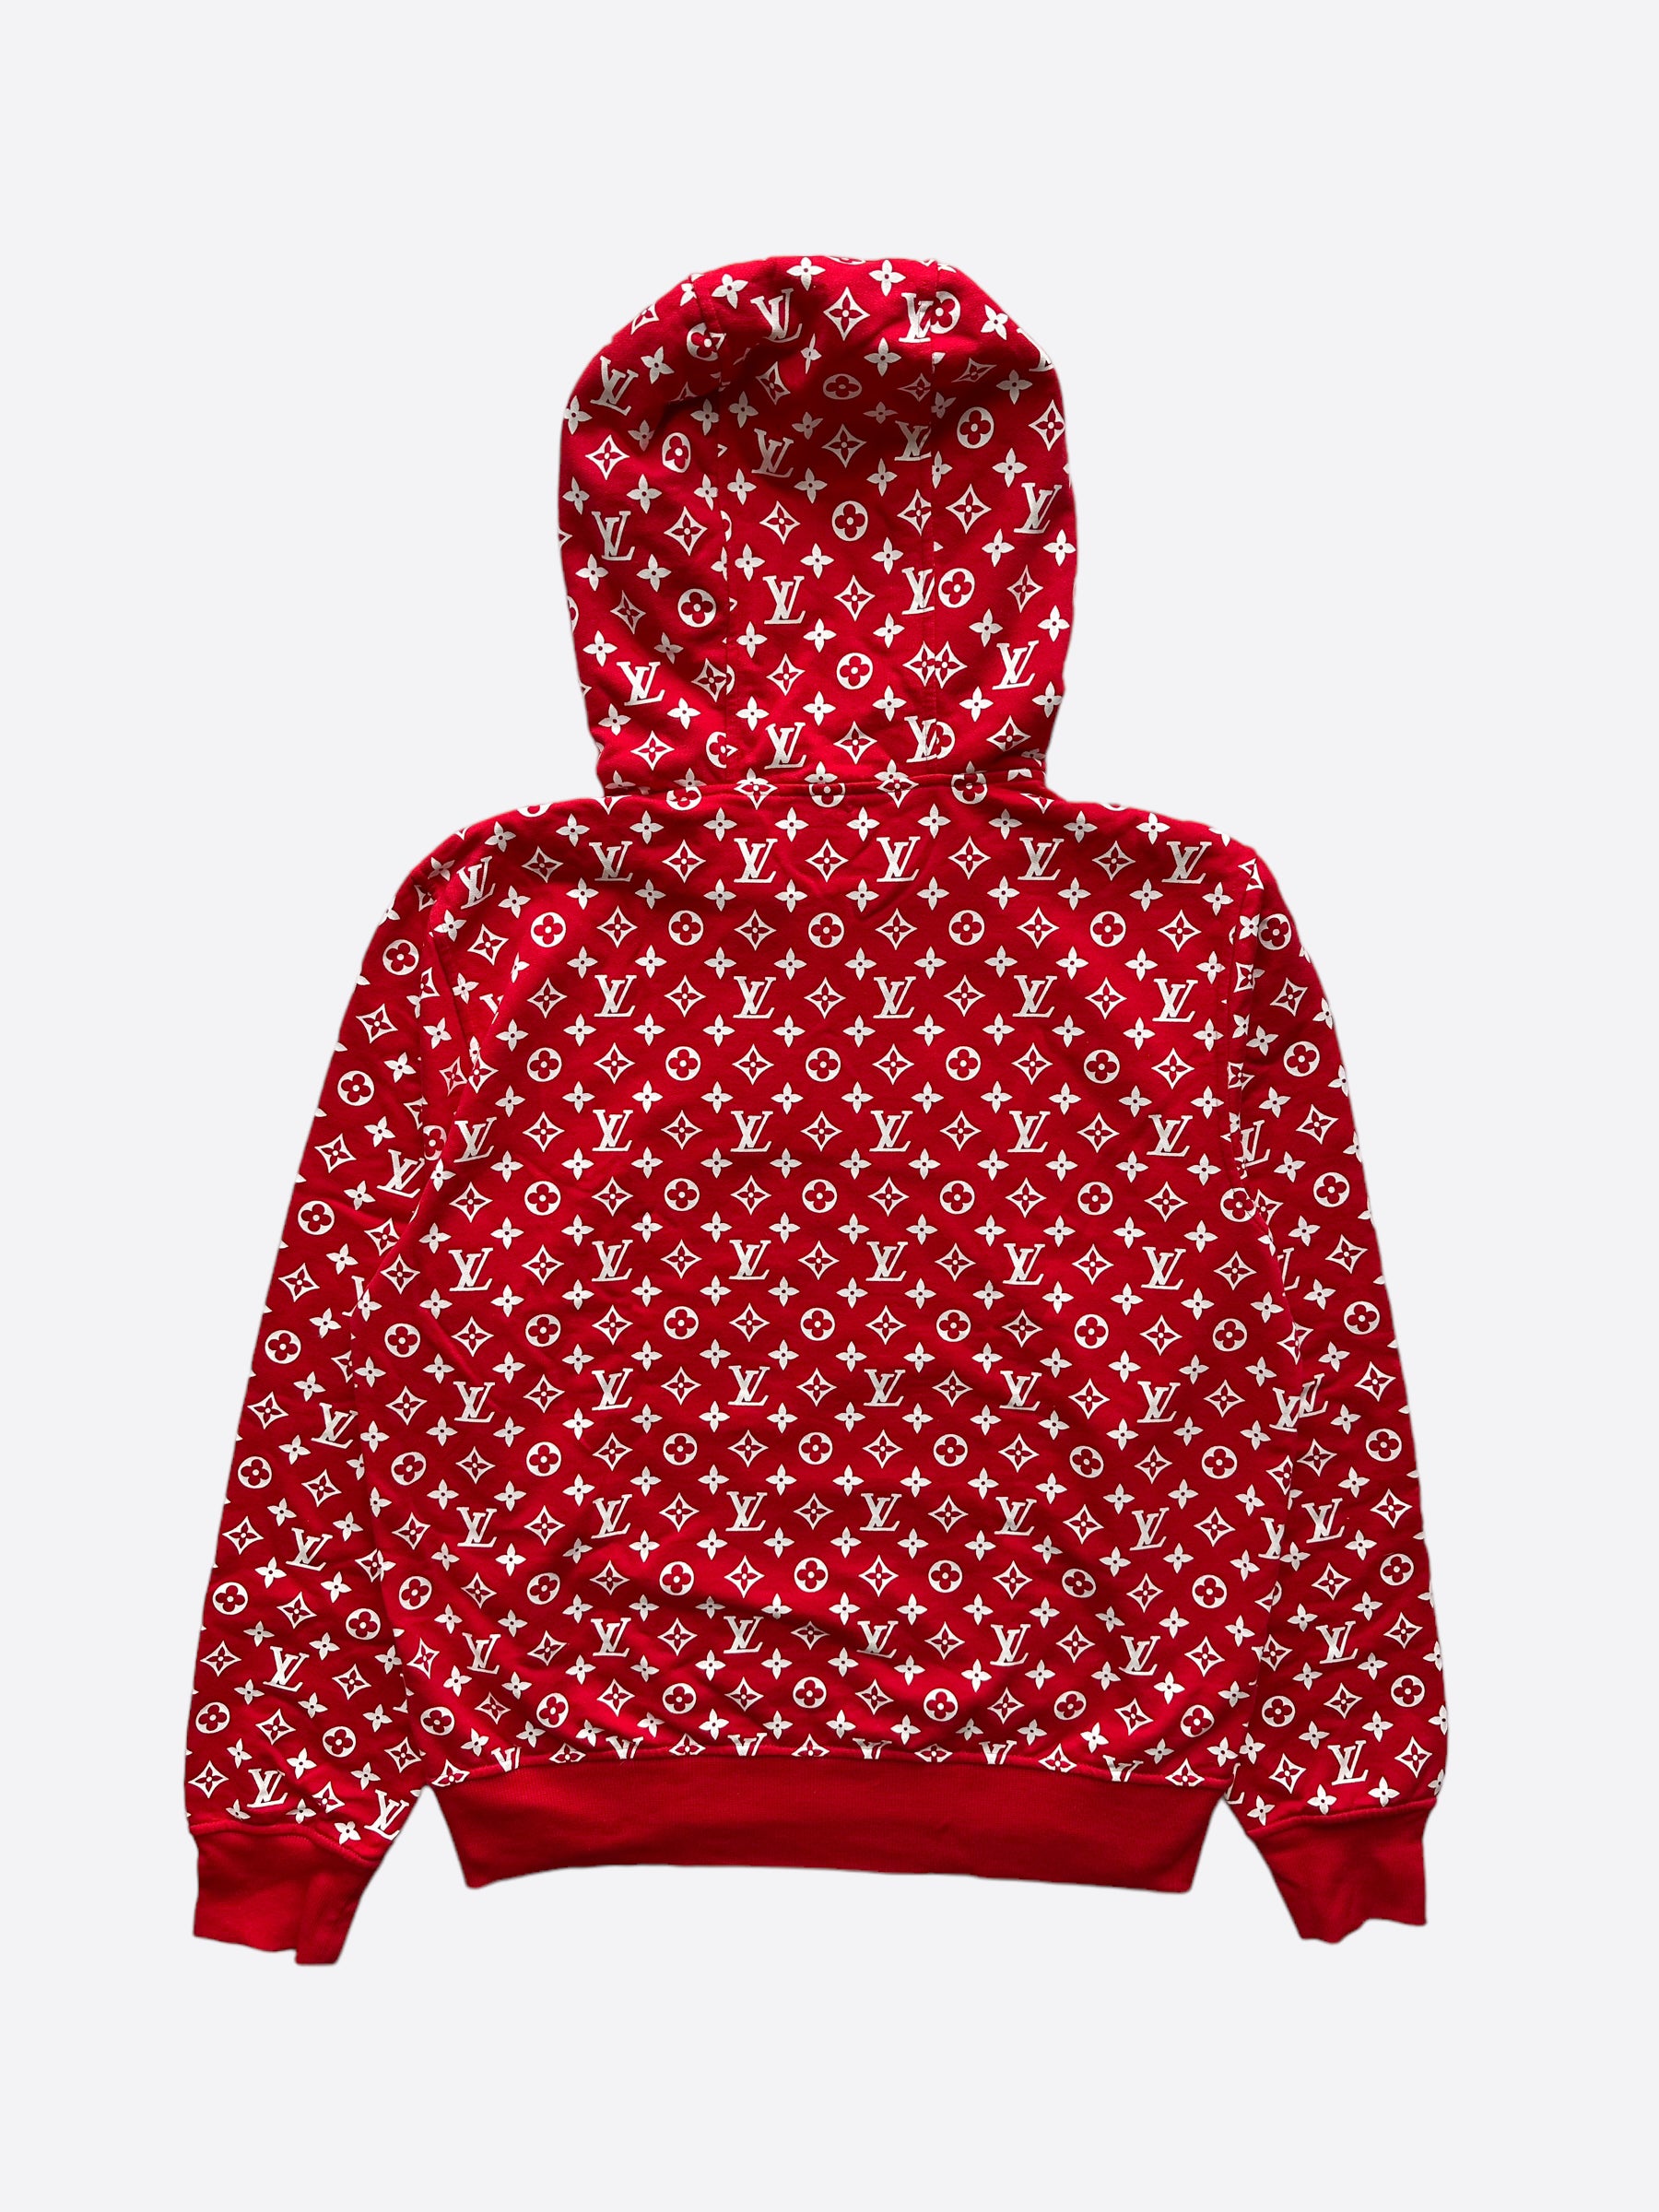 LOUIS VUITTON Pullover Hoodie Red Monogram size M Limited Edition Supreme  size:XXS｜Product Code：2104101506152｜BRAND OFF Online Store